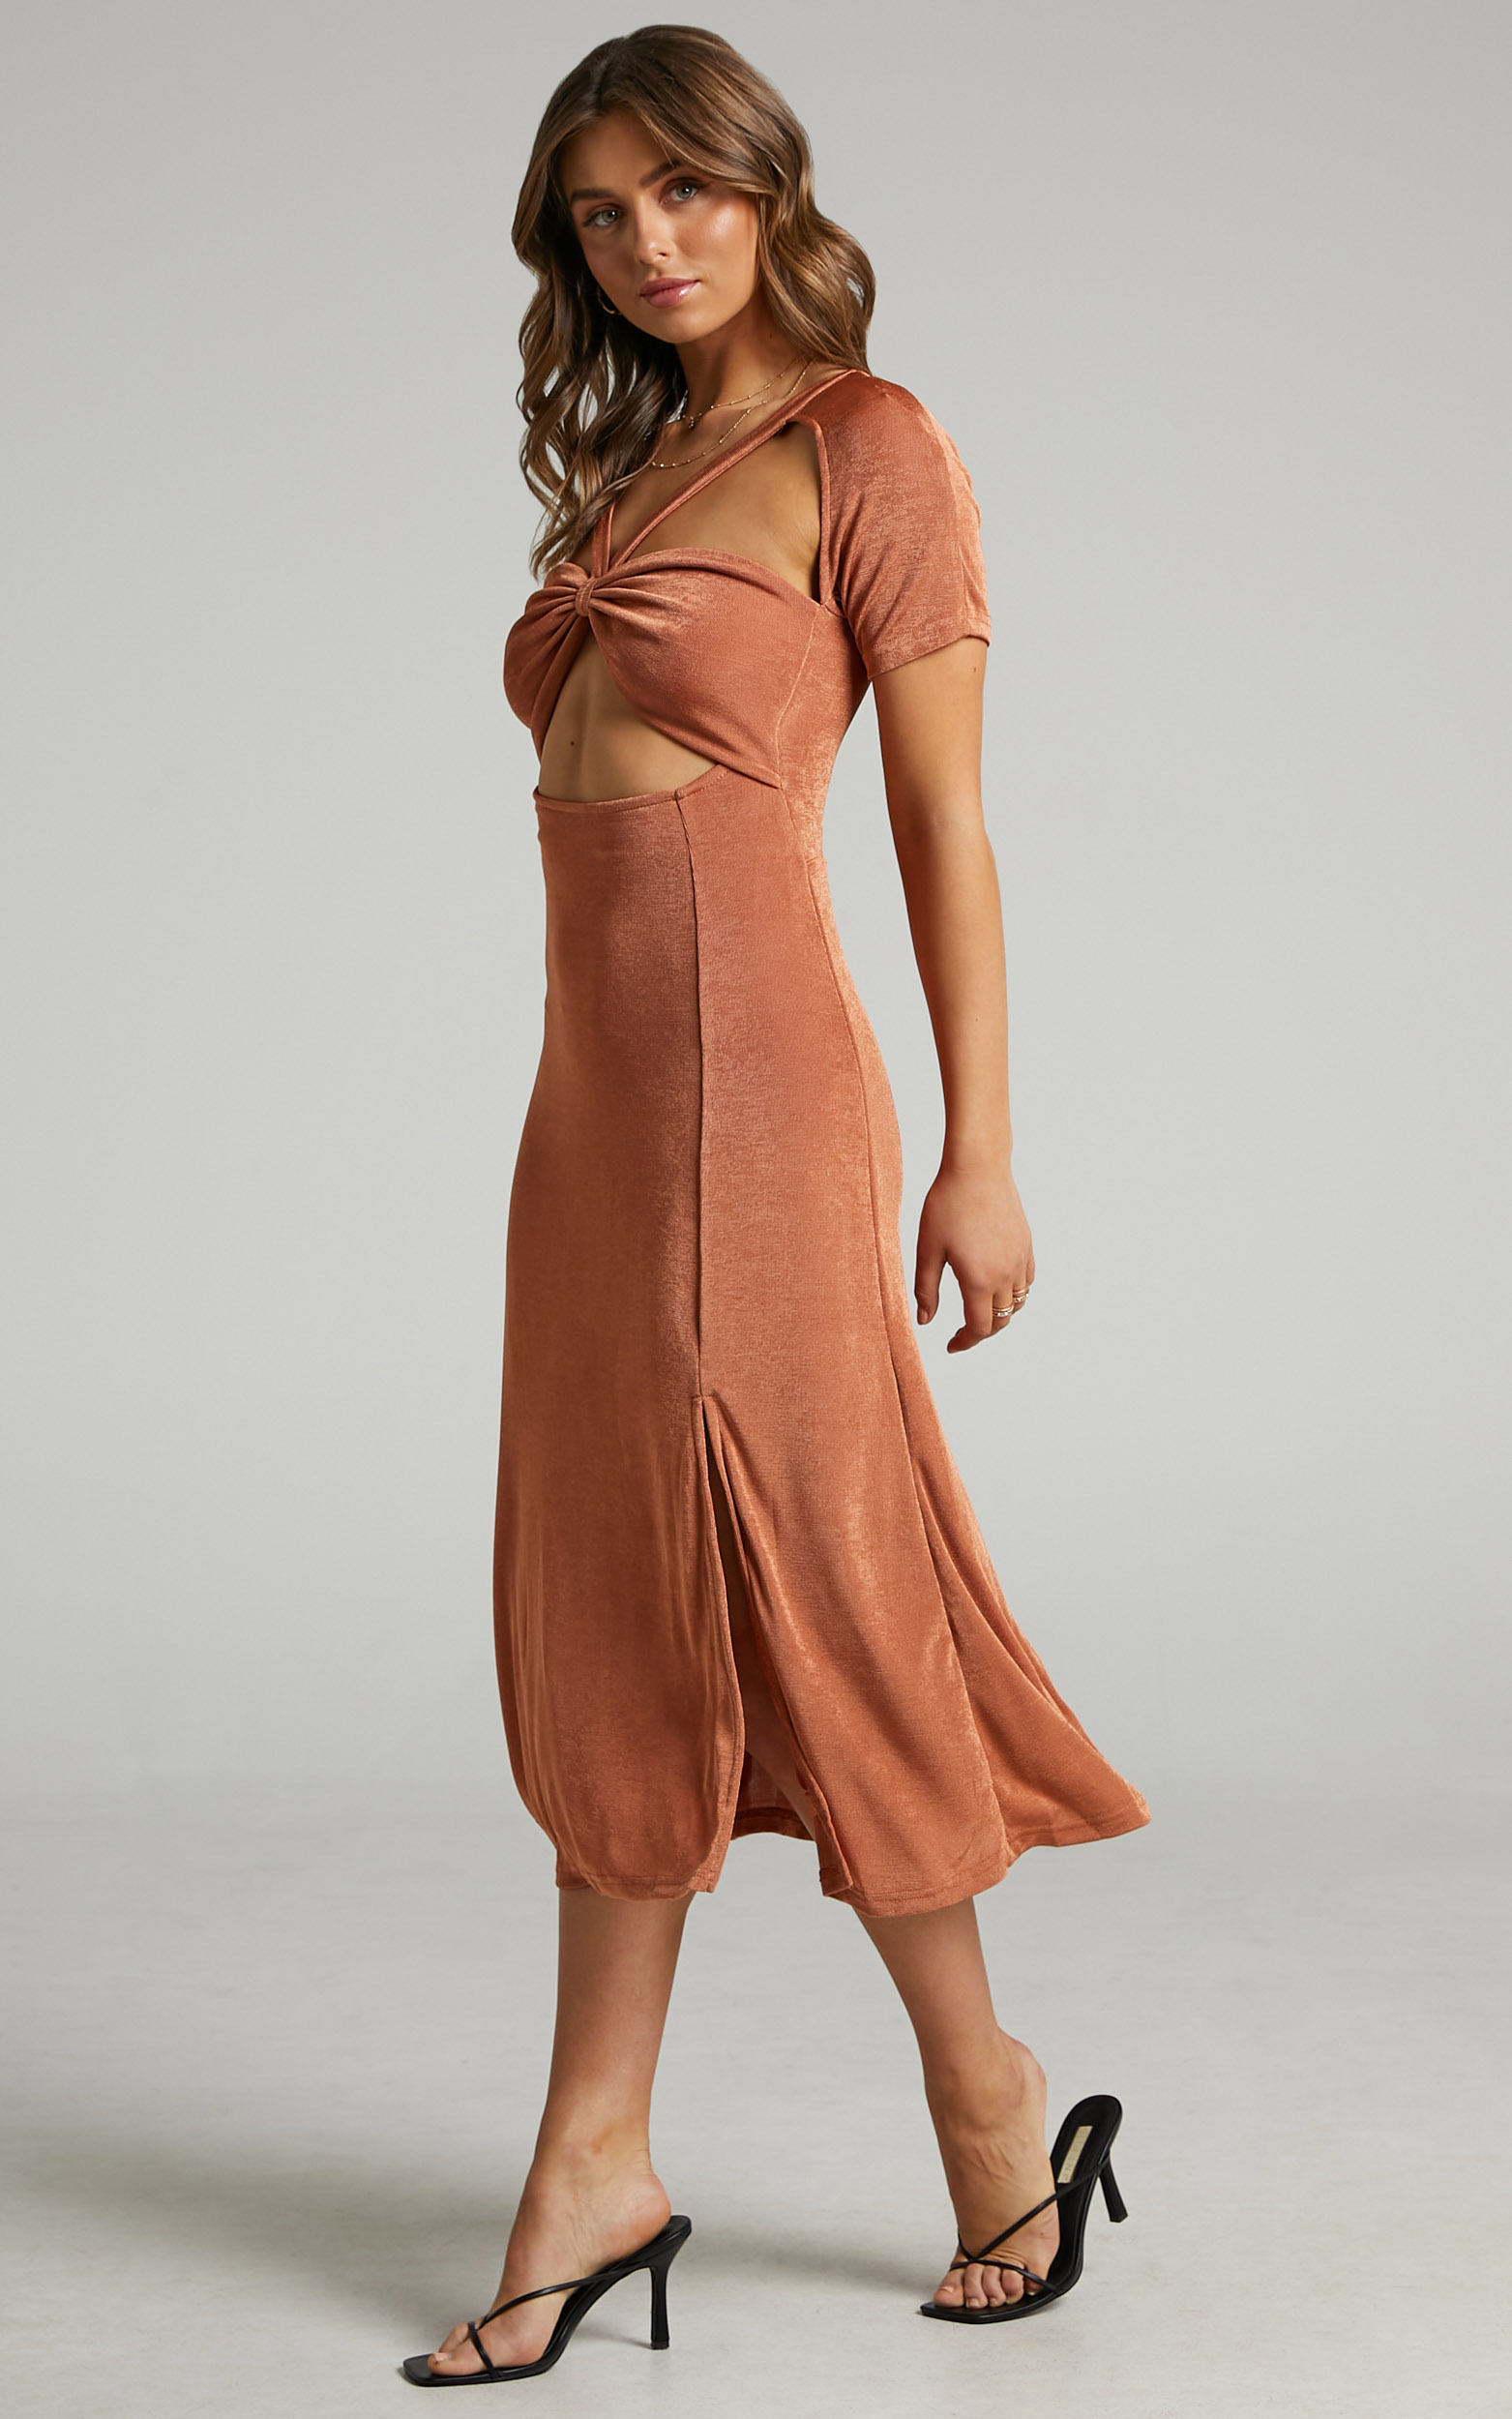 Lyanna Cut Out Midi Dress in Tan - 06, BRN1, hi-res image number null